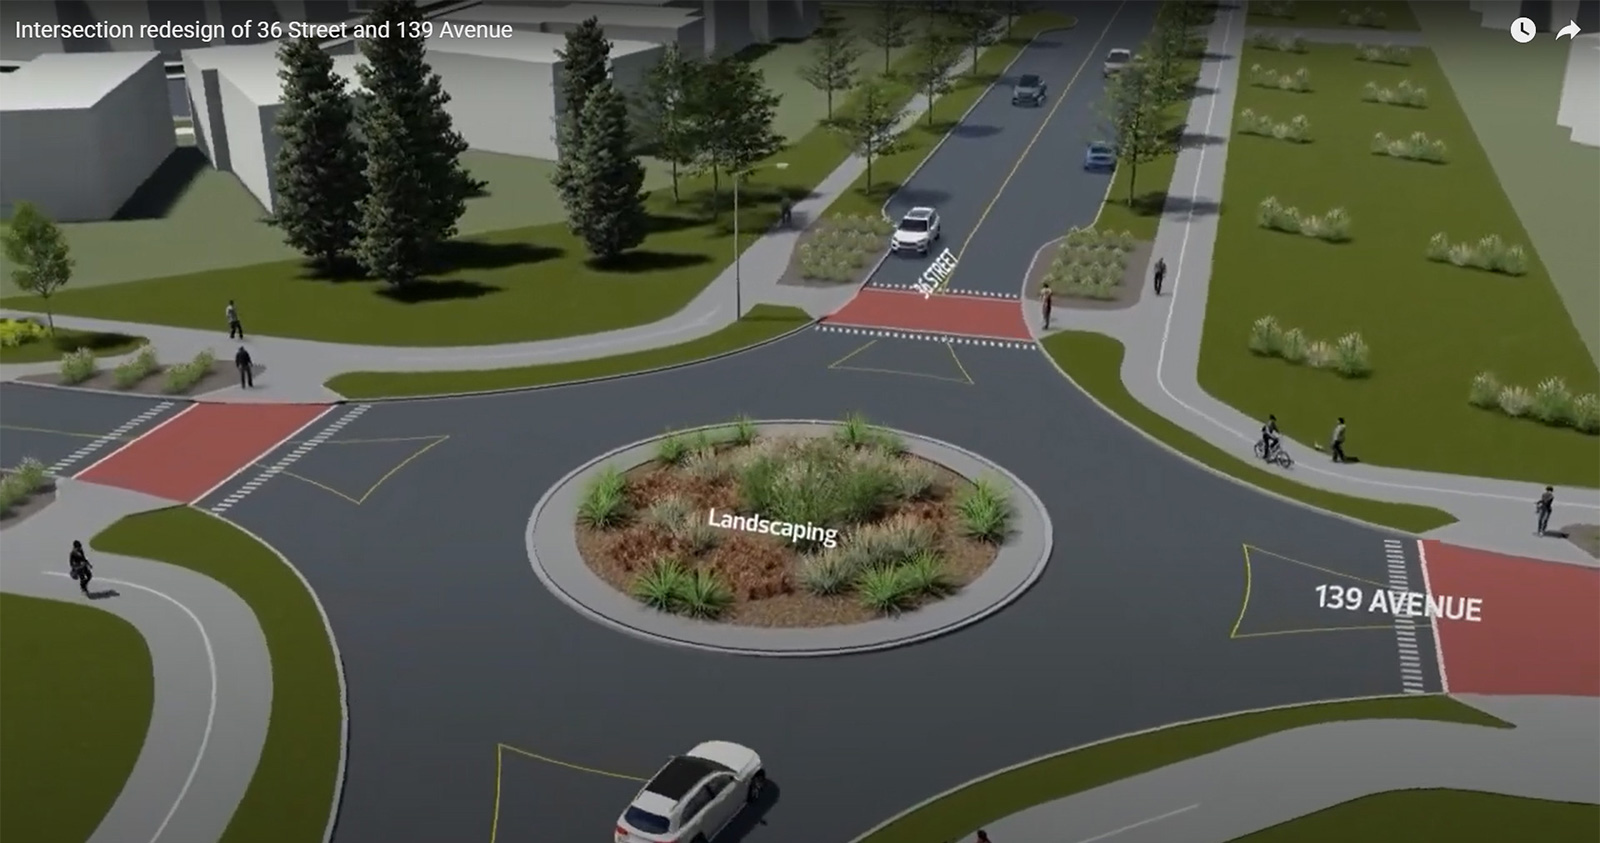 Intersection redesign of 36 Street and 139 Avenue